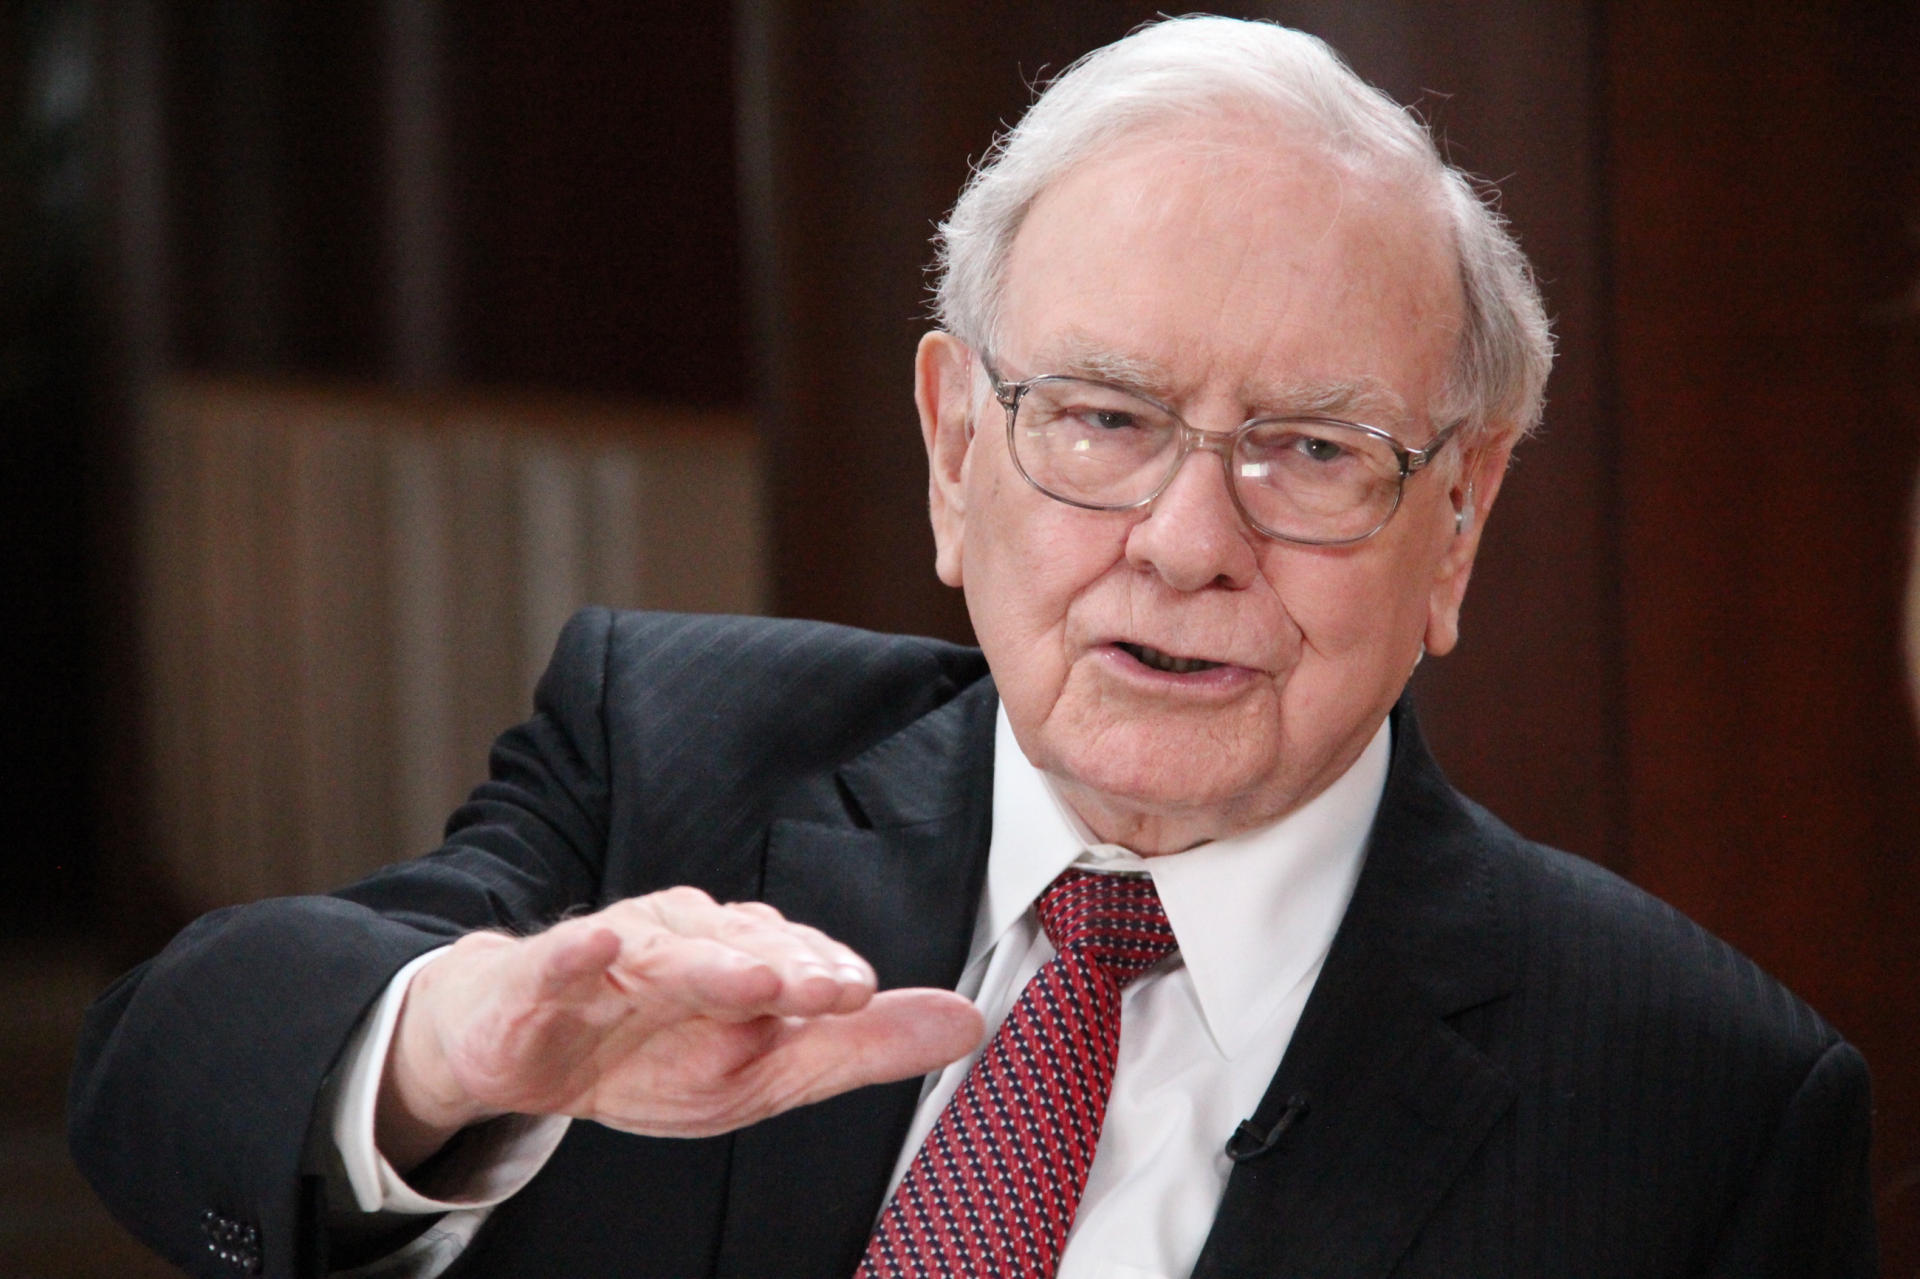 Warren Buffett's charity lunch with cryptocurrency entrepreneur postponed